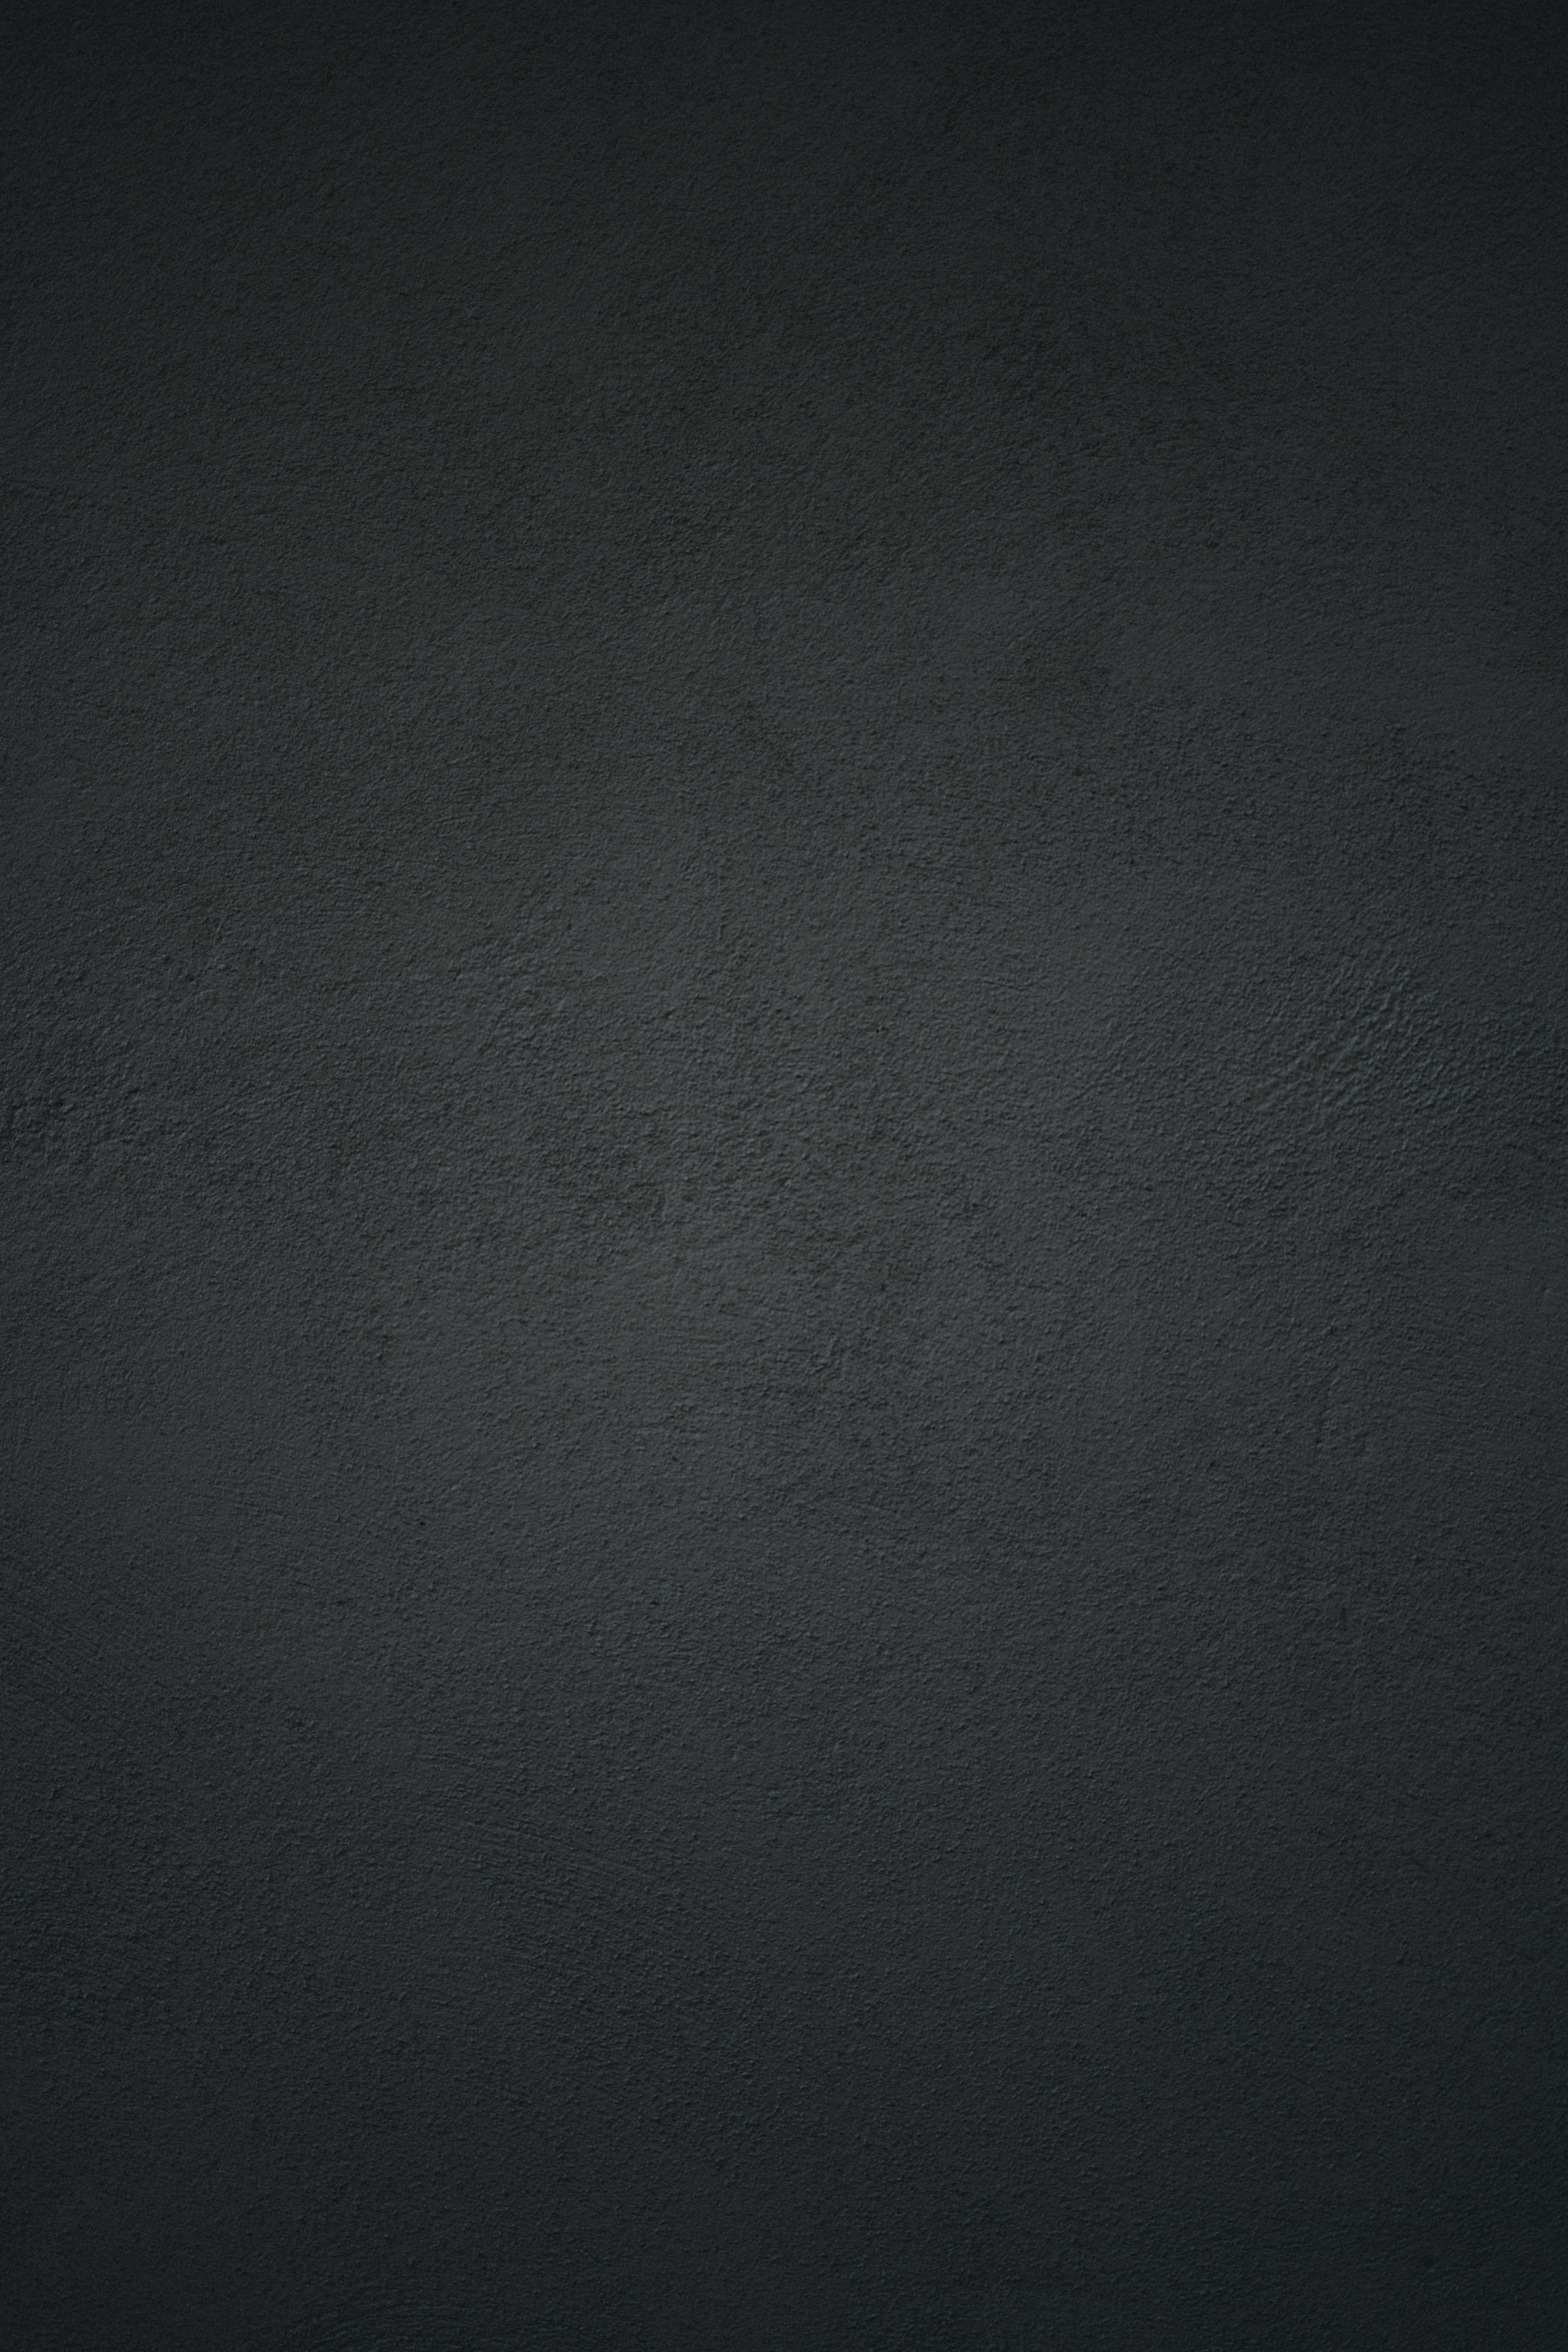 android texture, surface, textures, relief, grey